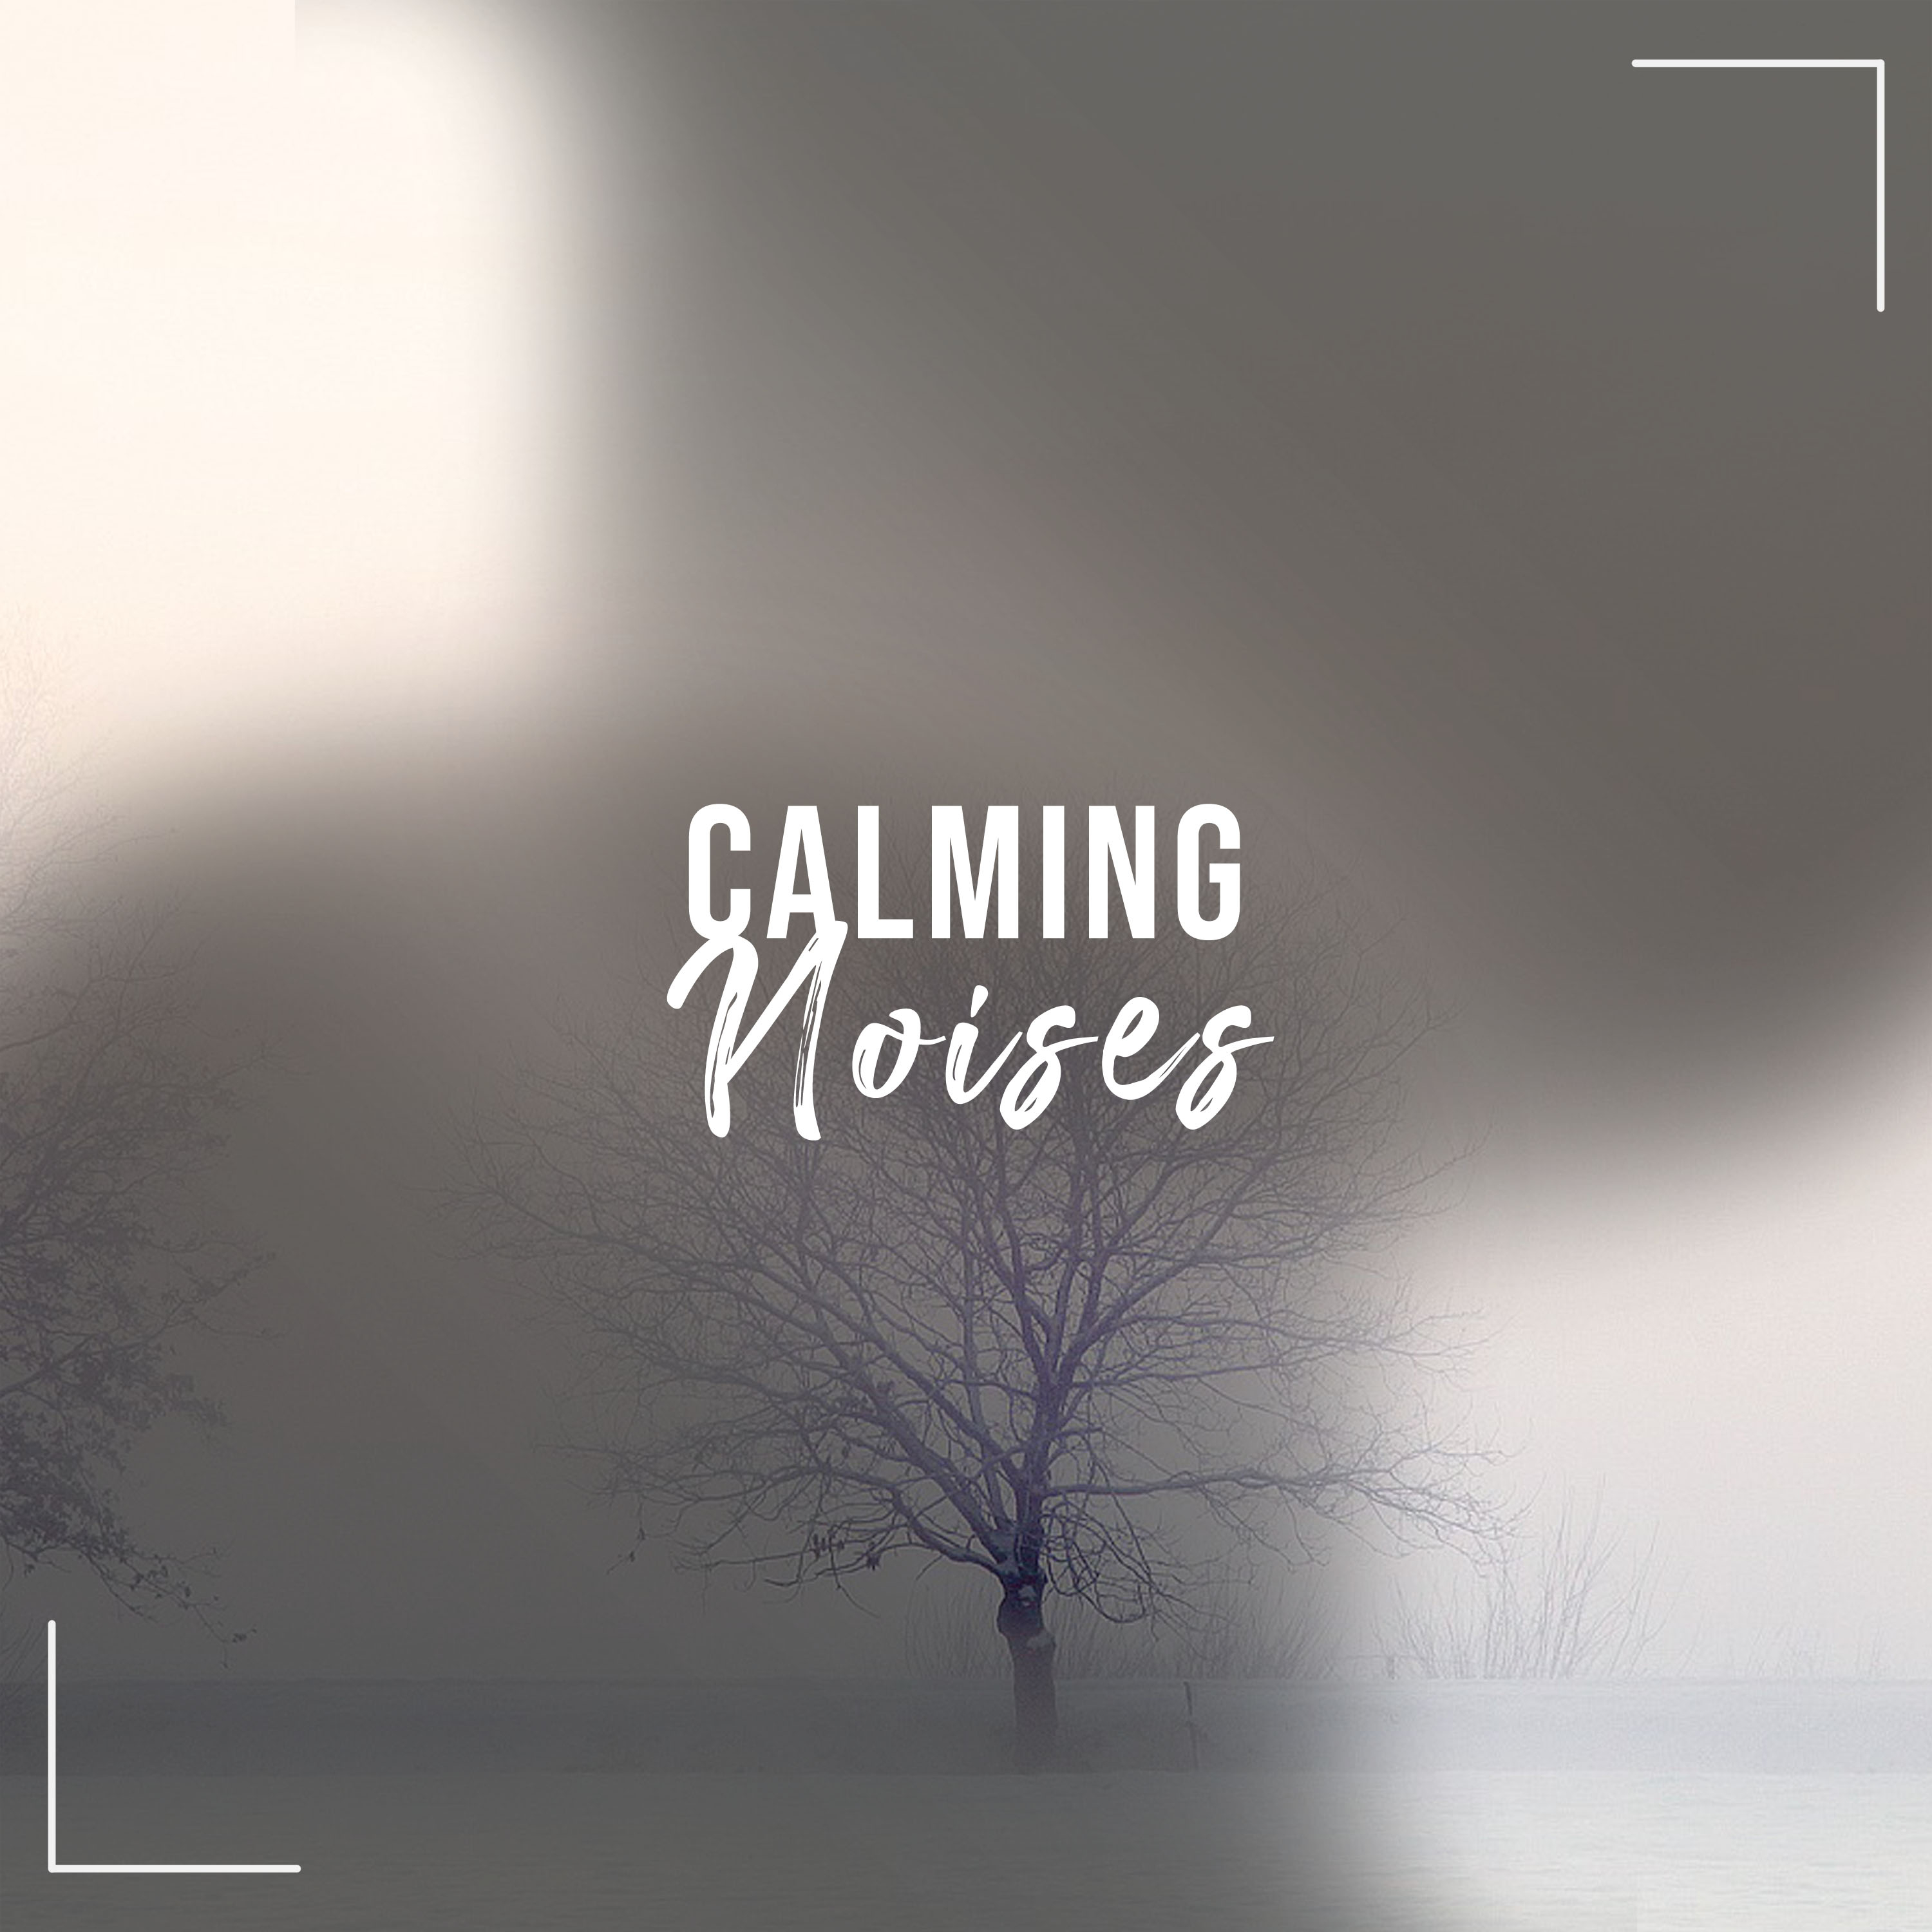 #1 Hour Naturally Calming Noises to Relax